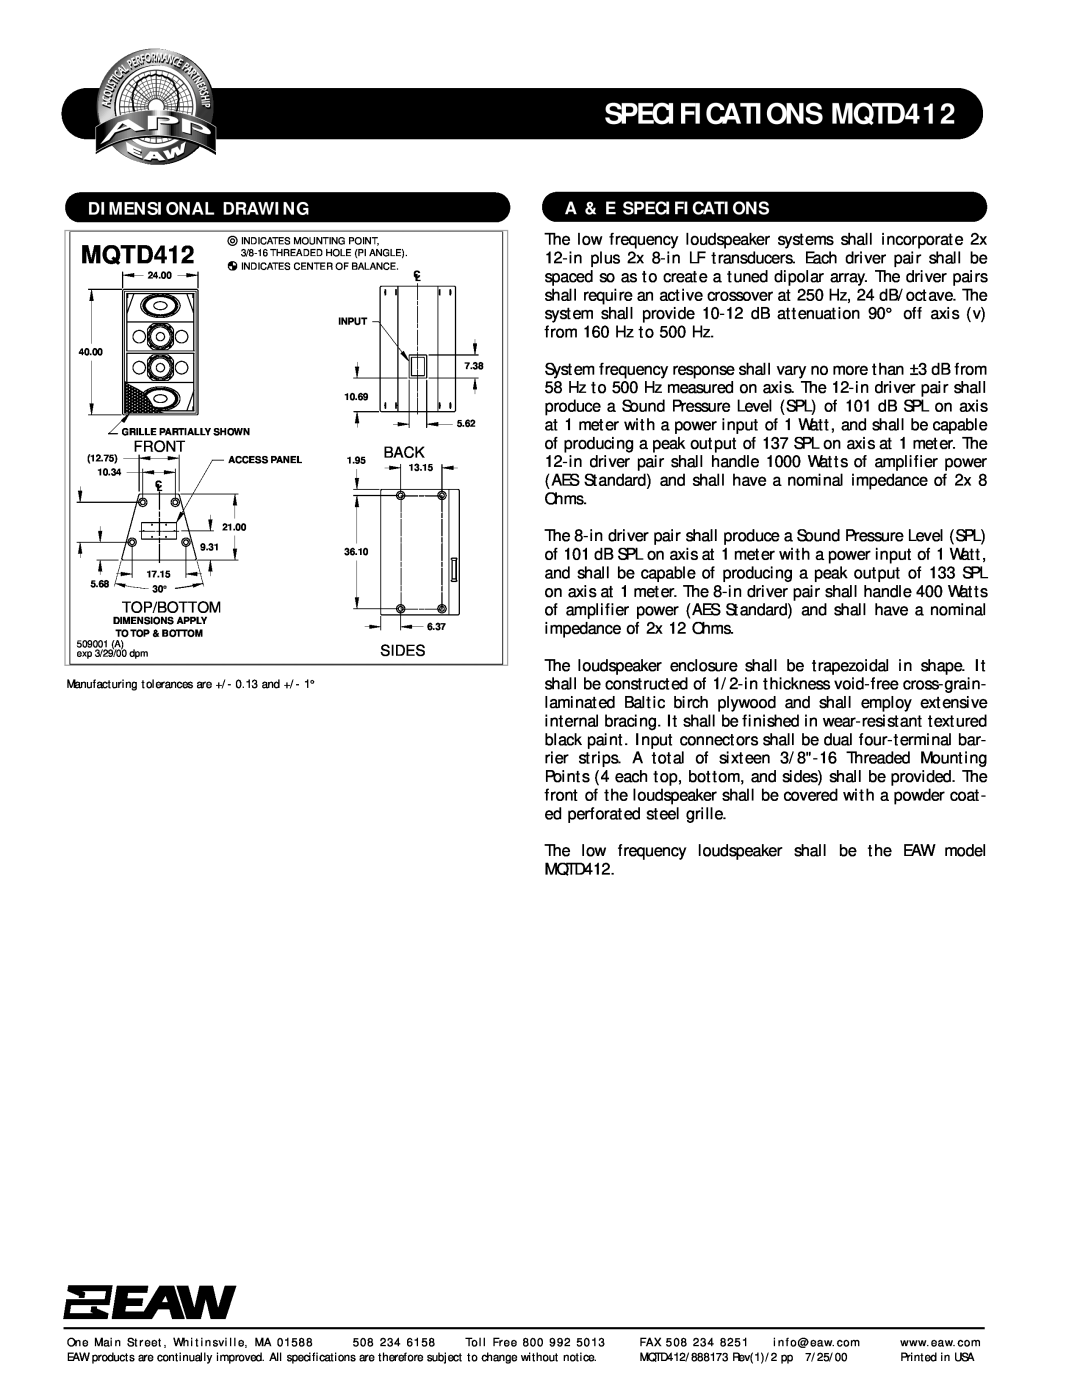 EAW MQTD412 2D specifications Dimensional Drawing, A & E Specifications, SPECIFICATIONS MQTD412 